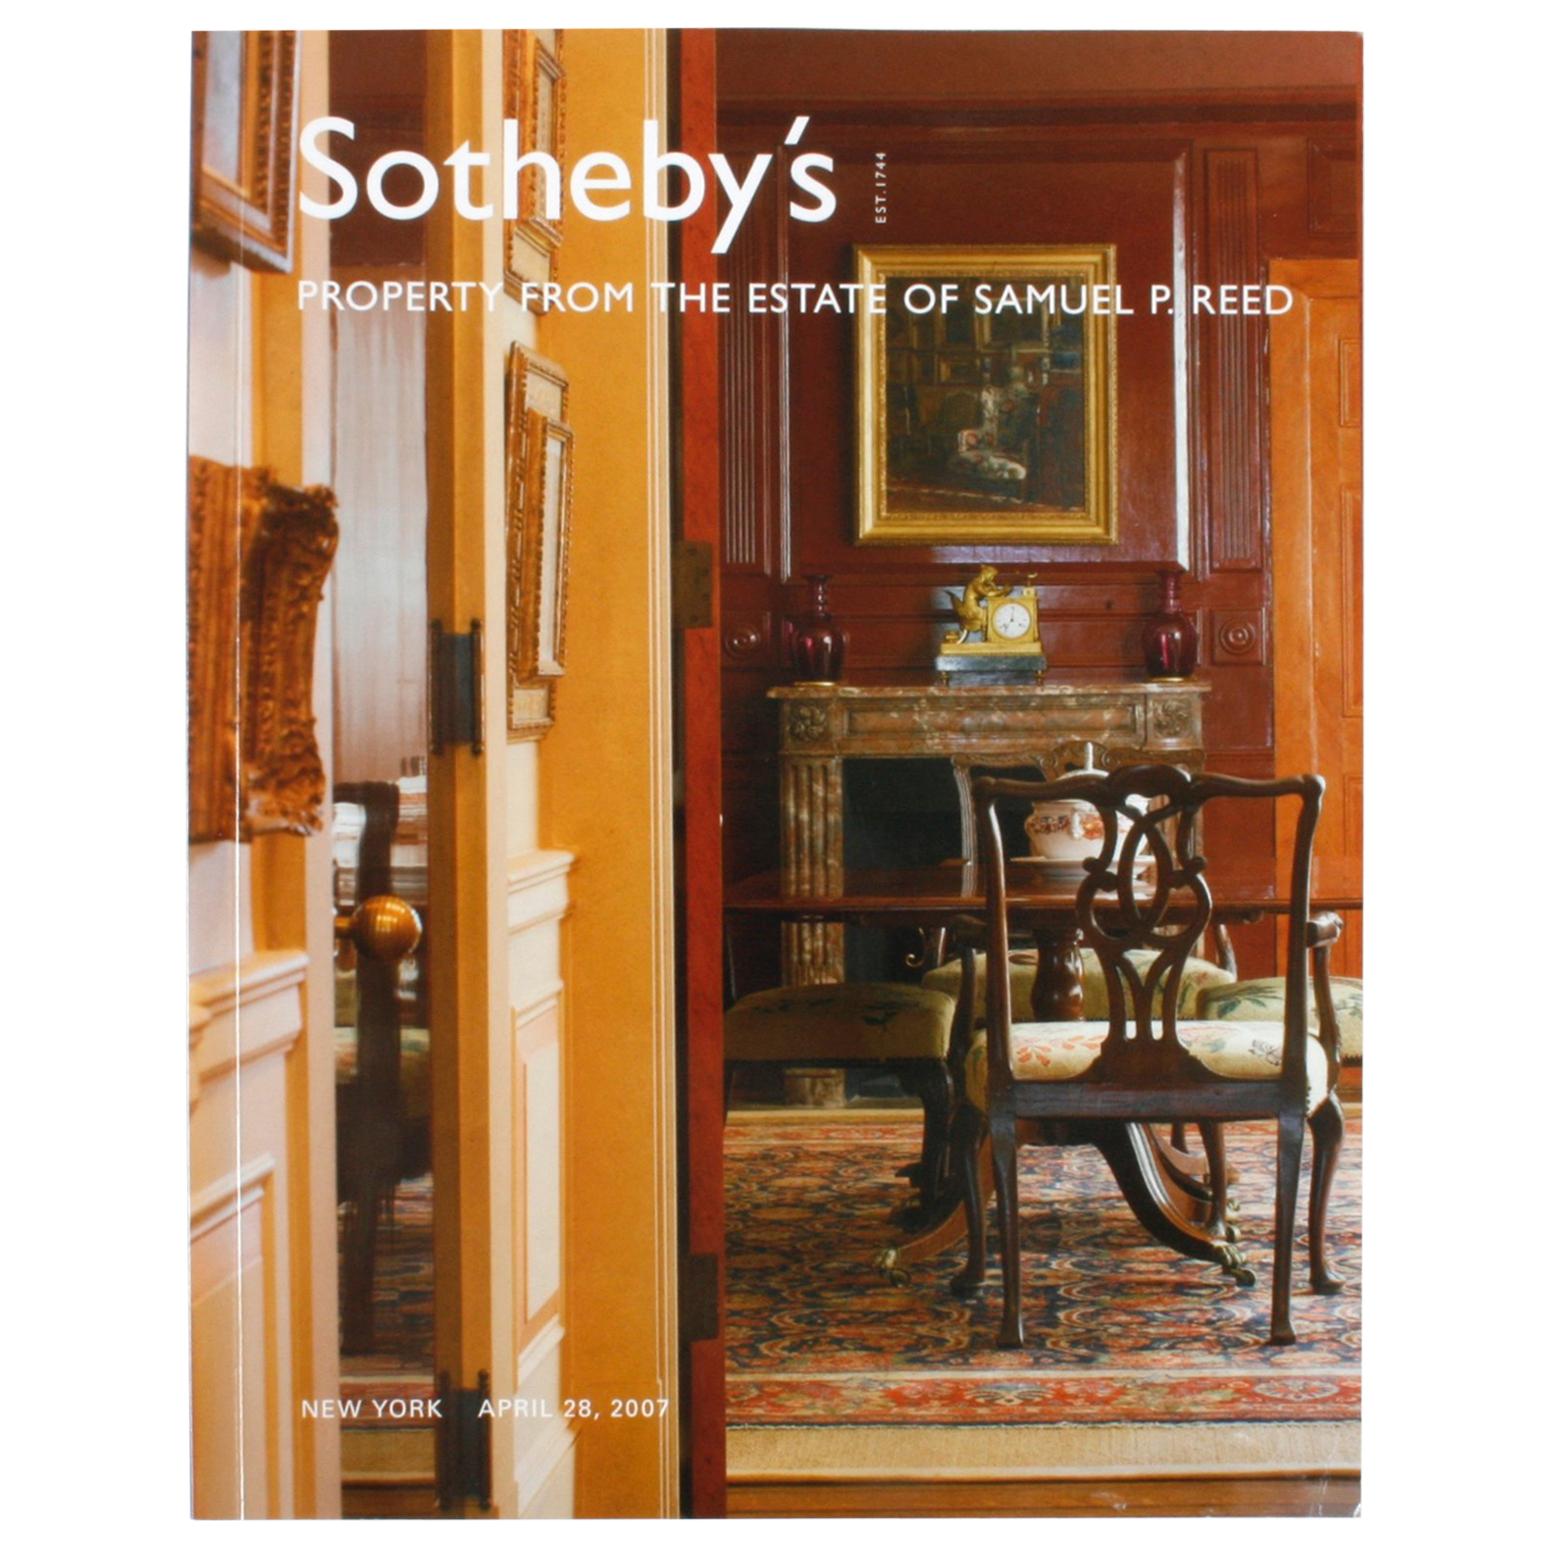 Sotheby's Property from the Estate of Samuel P. Reed, April 2007